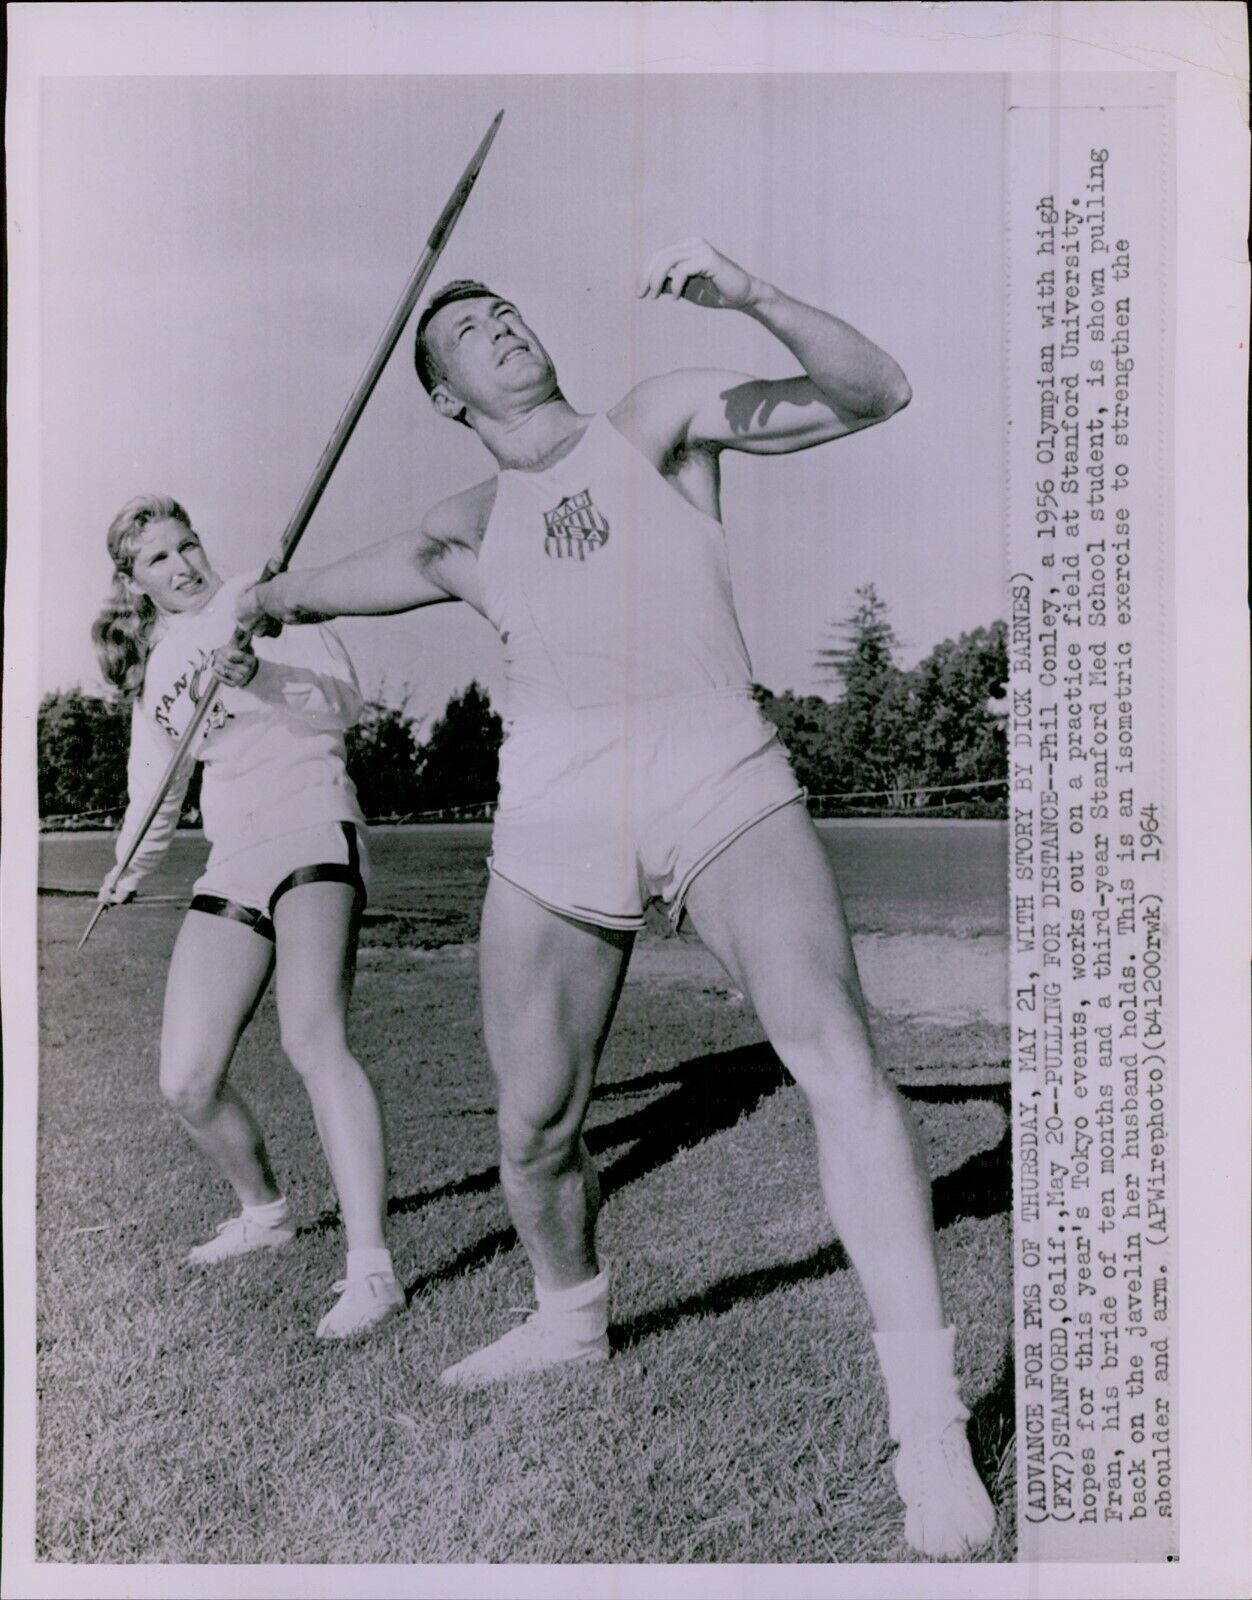 LG786 1964 Wire Photo PHIL CONLEY Olympic Jevelin Thrower Stanford California